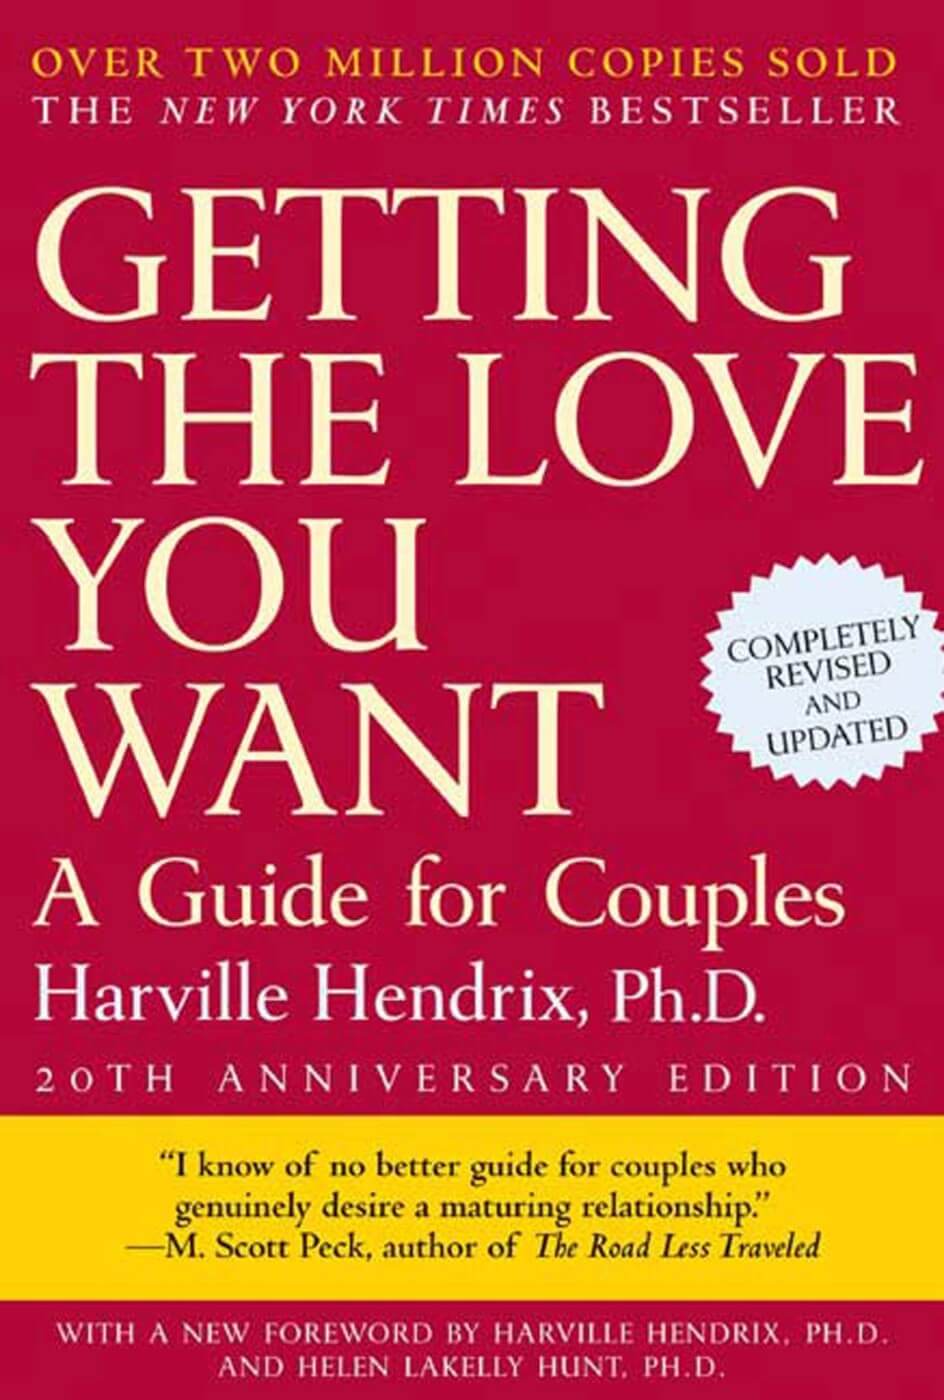 Books on relationships - getting the love you want